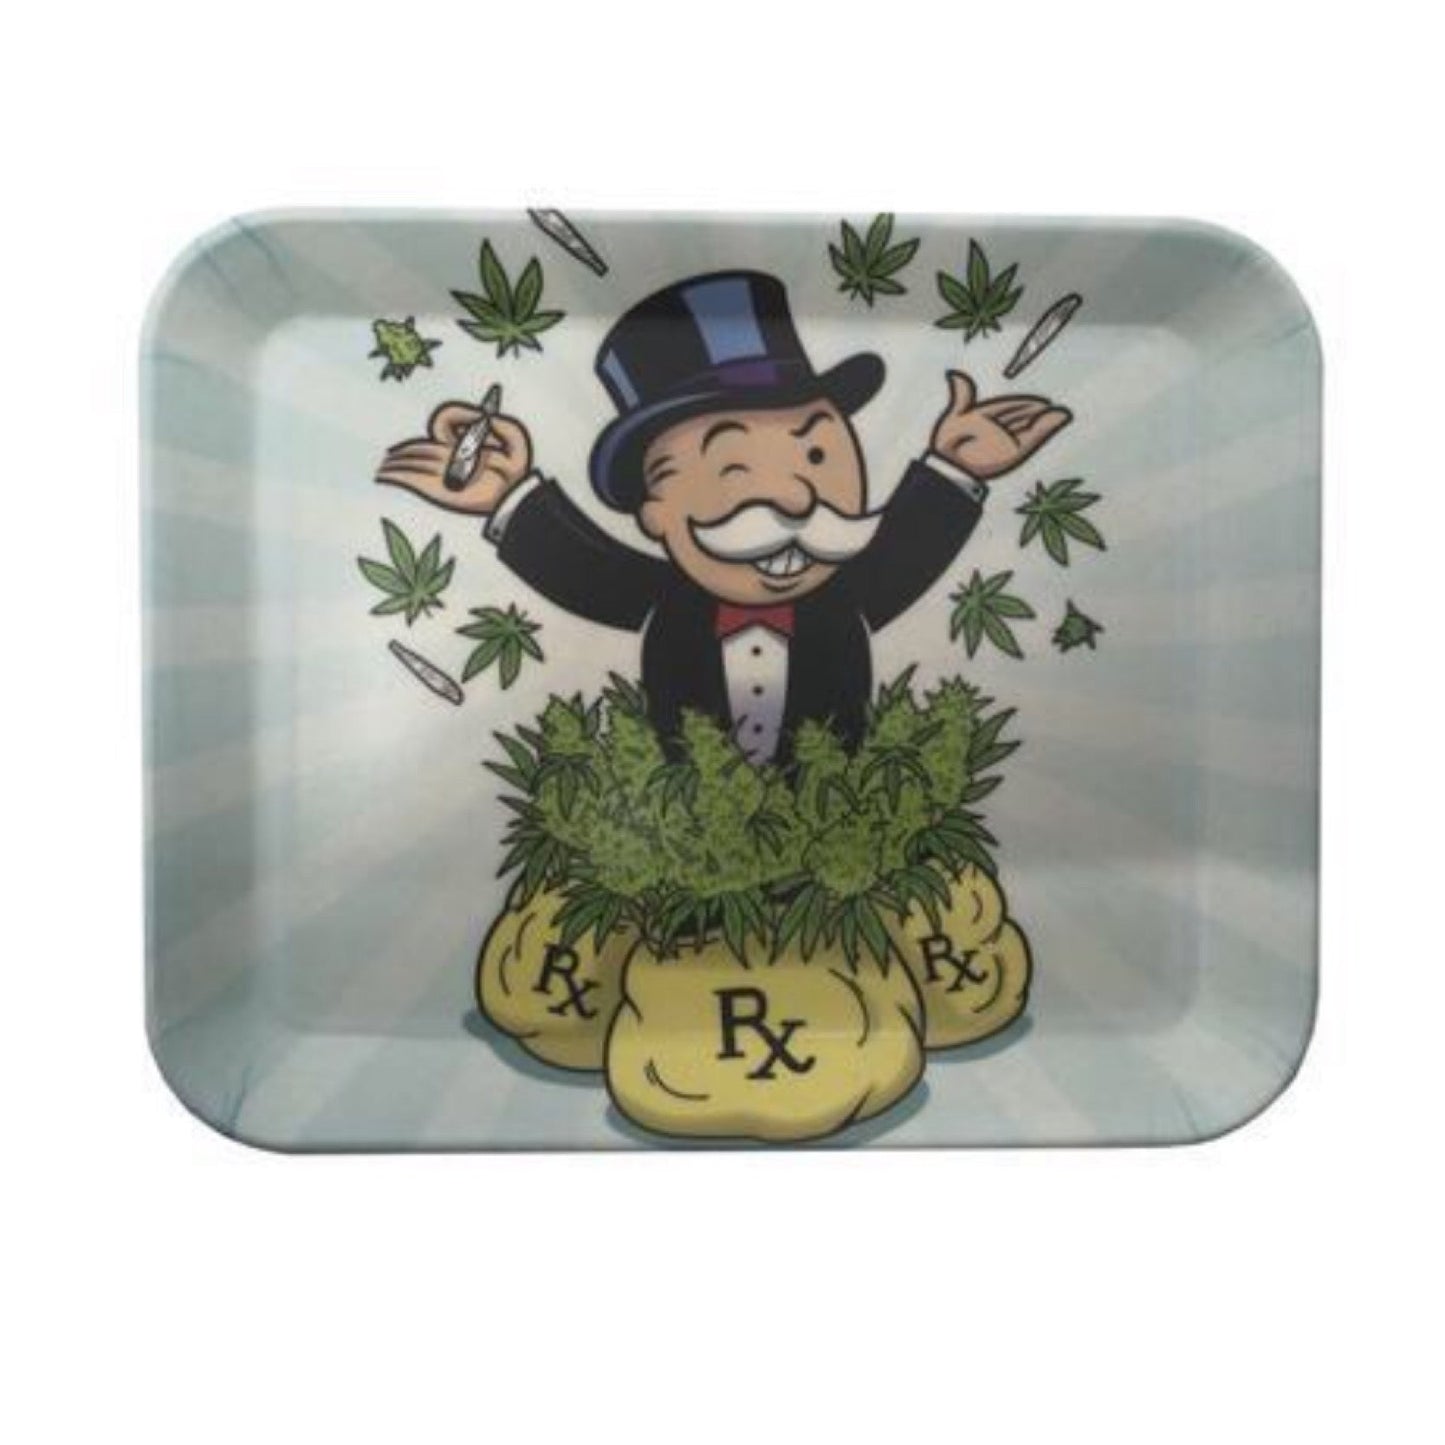 Limited Edition “Mary Jane Monopoly Man” Rolling Tray (7.5 x 6) by Mission Dispensary | Mission Dispensary